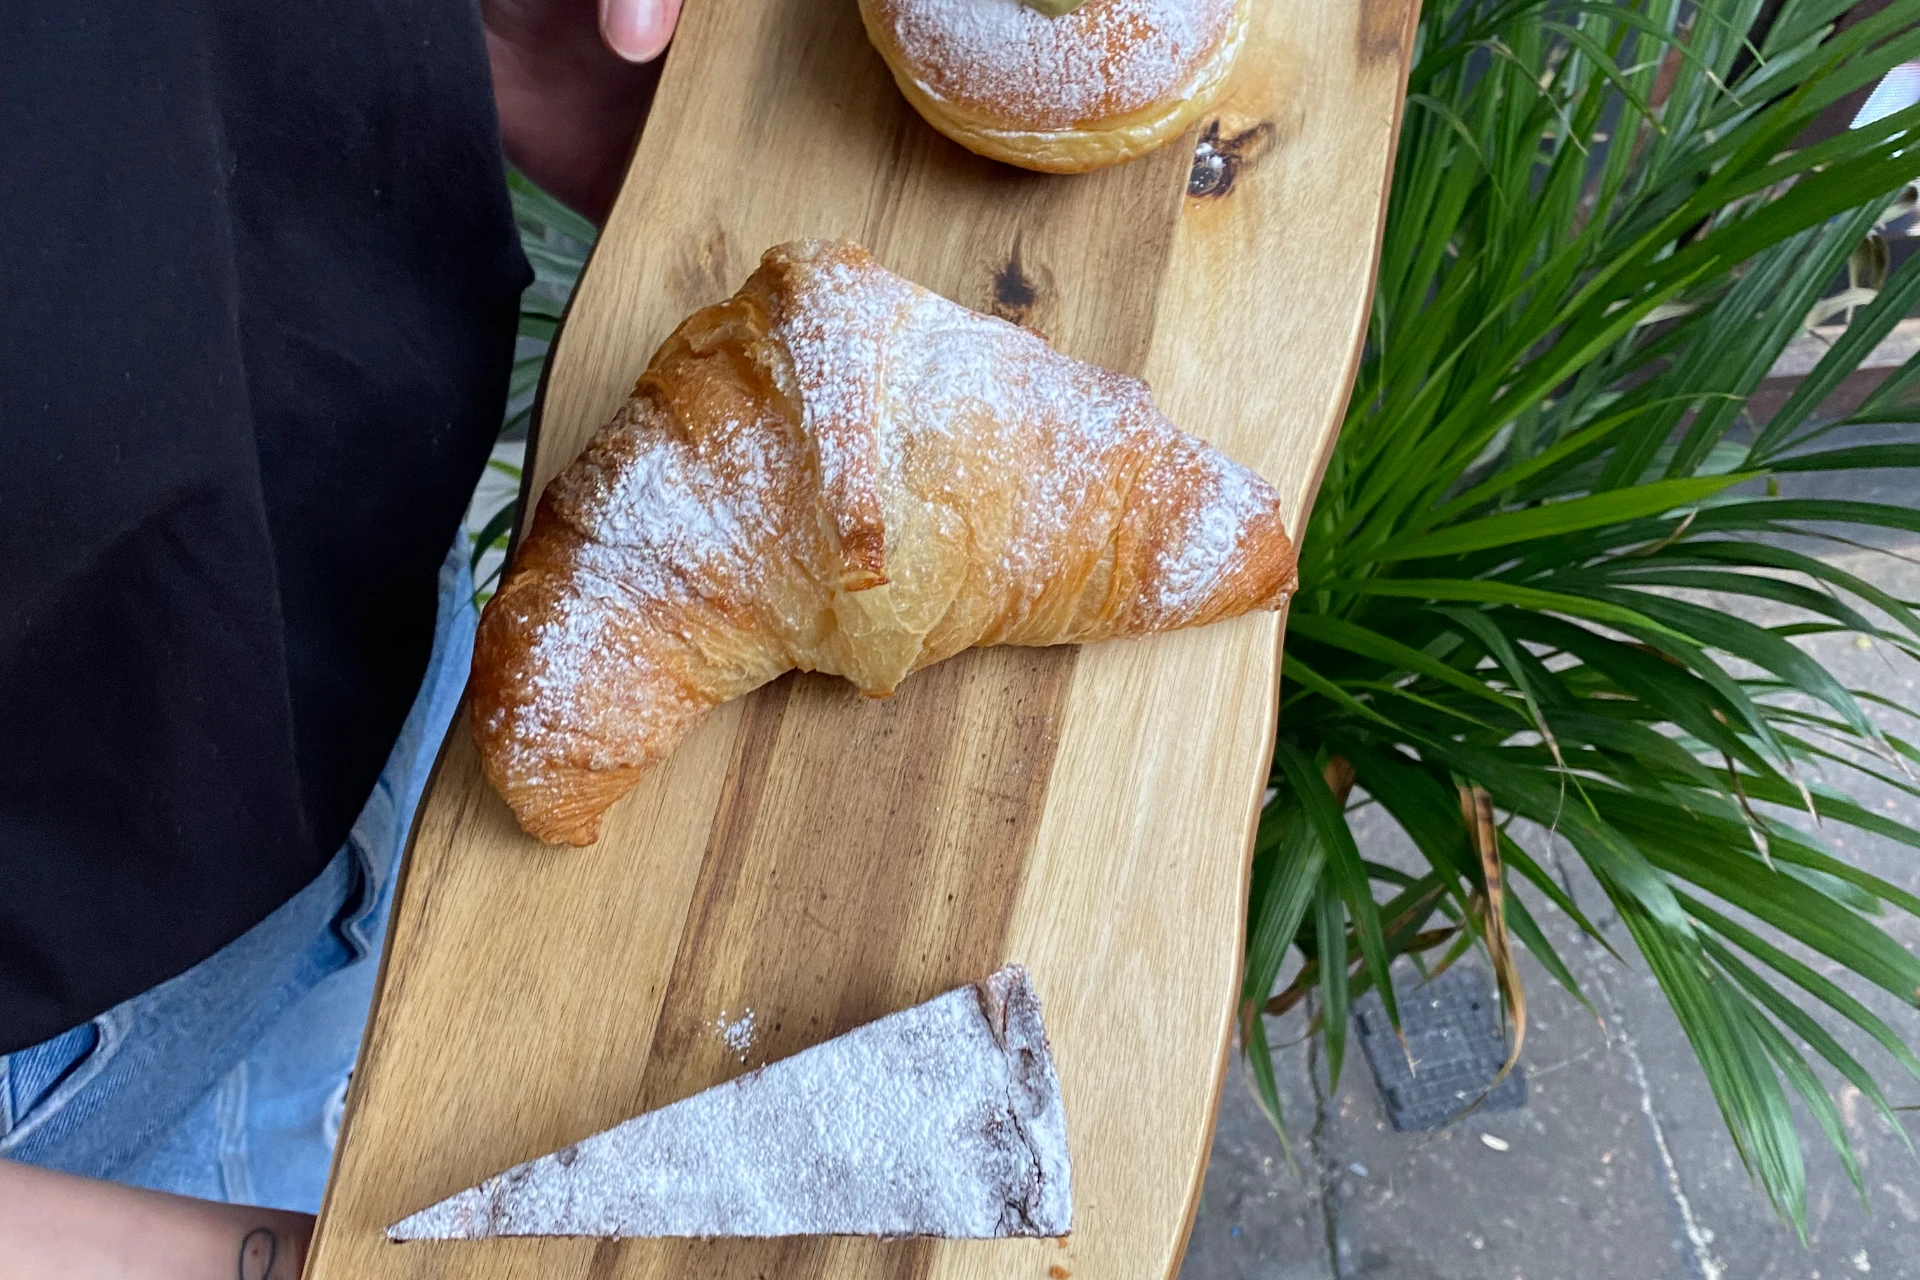 Sicilian Pastries: Explore the Food of Sicily in London